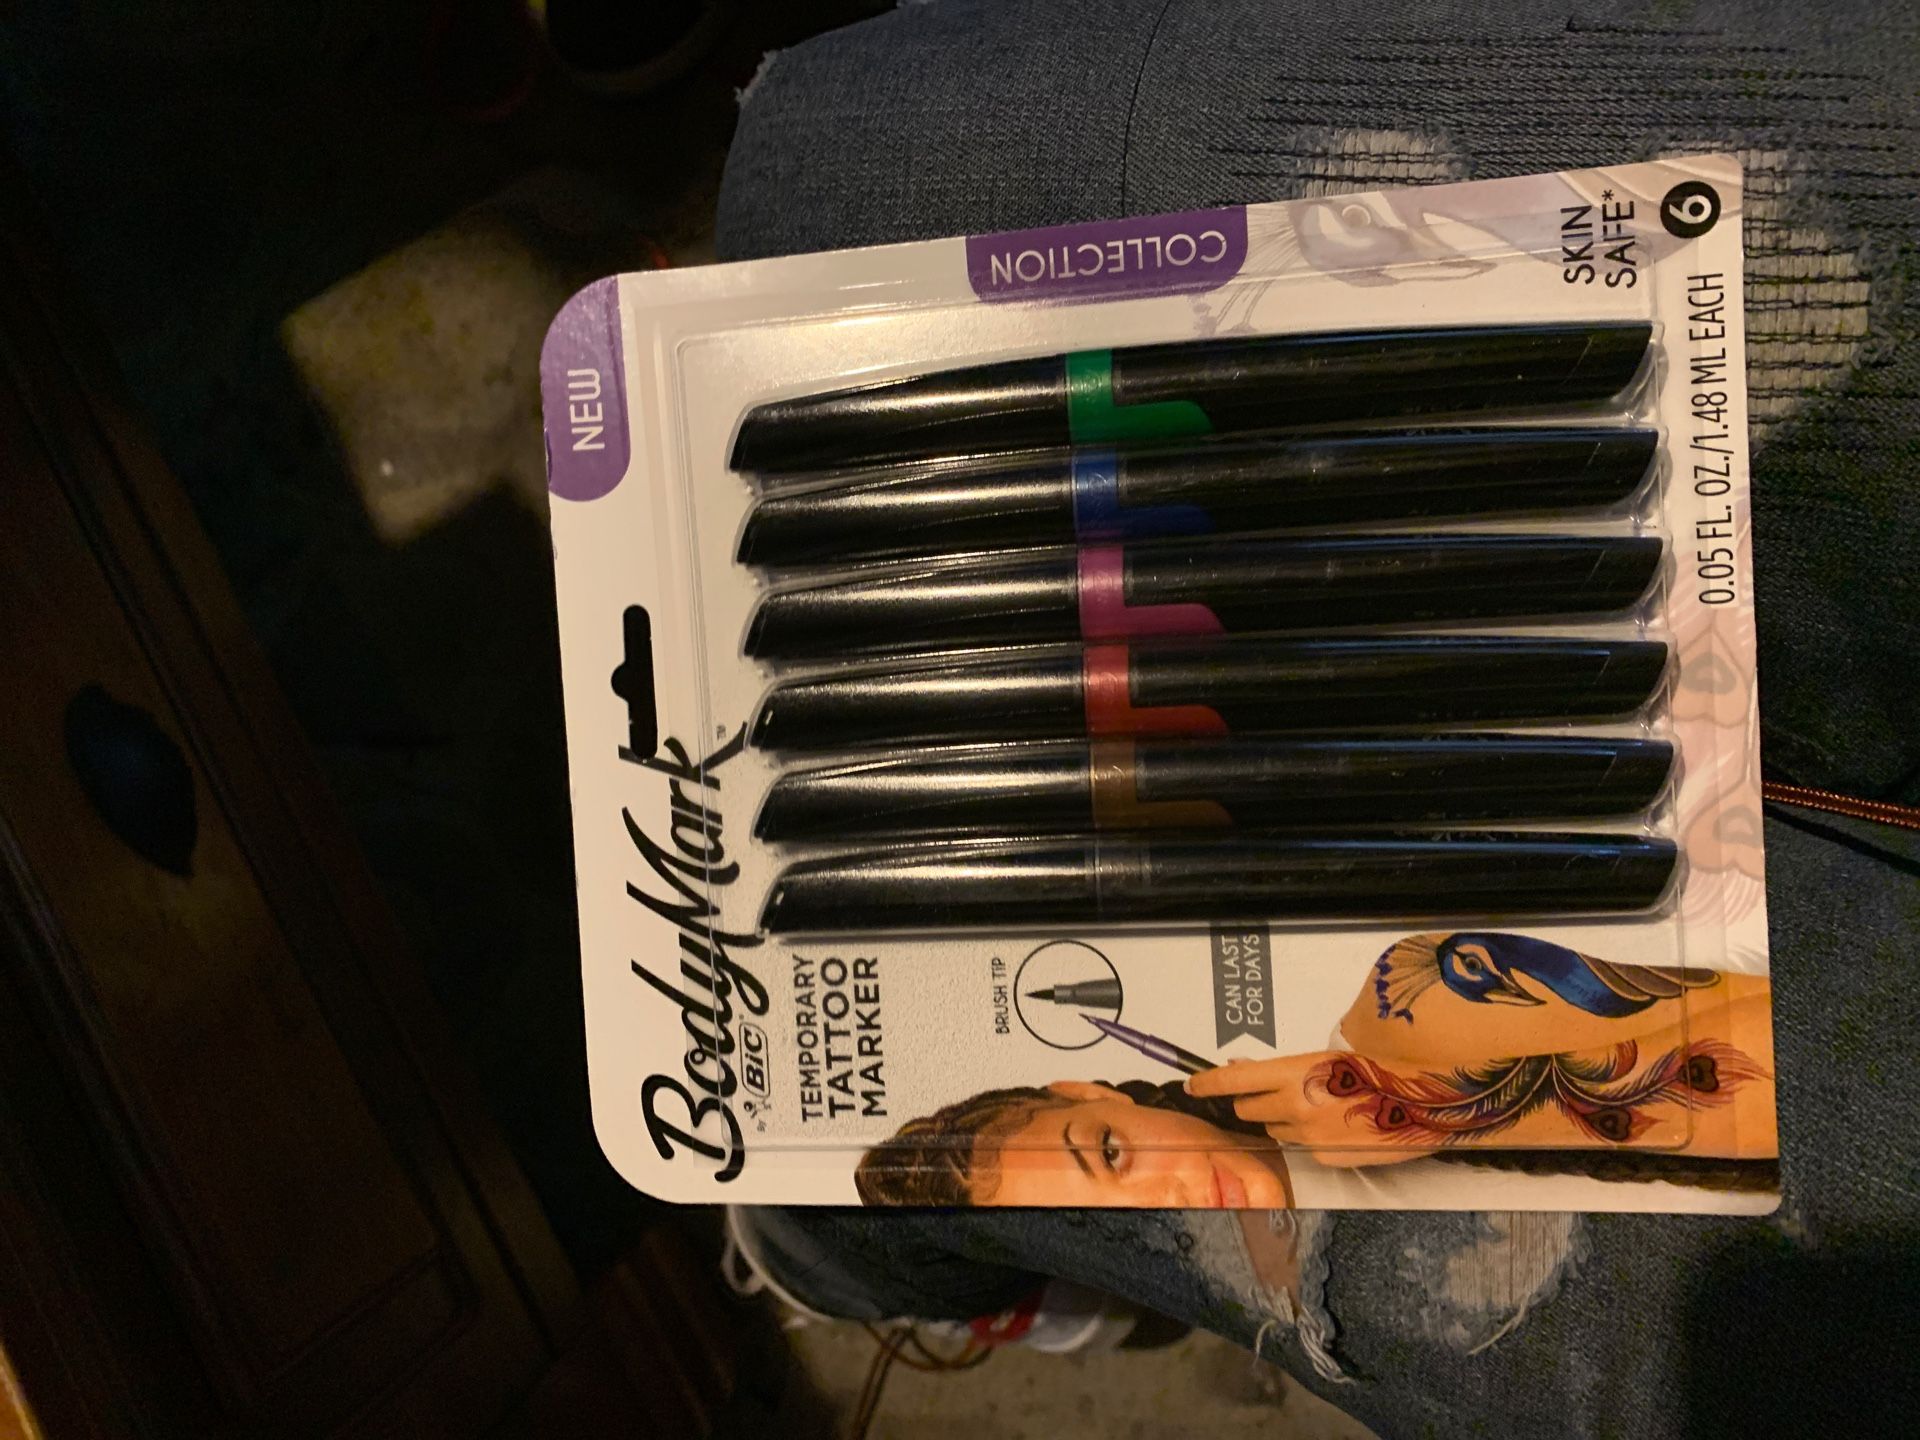 Bic body mark pens ! Awesome temporary henna style tattoo pens